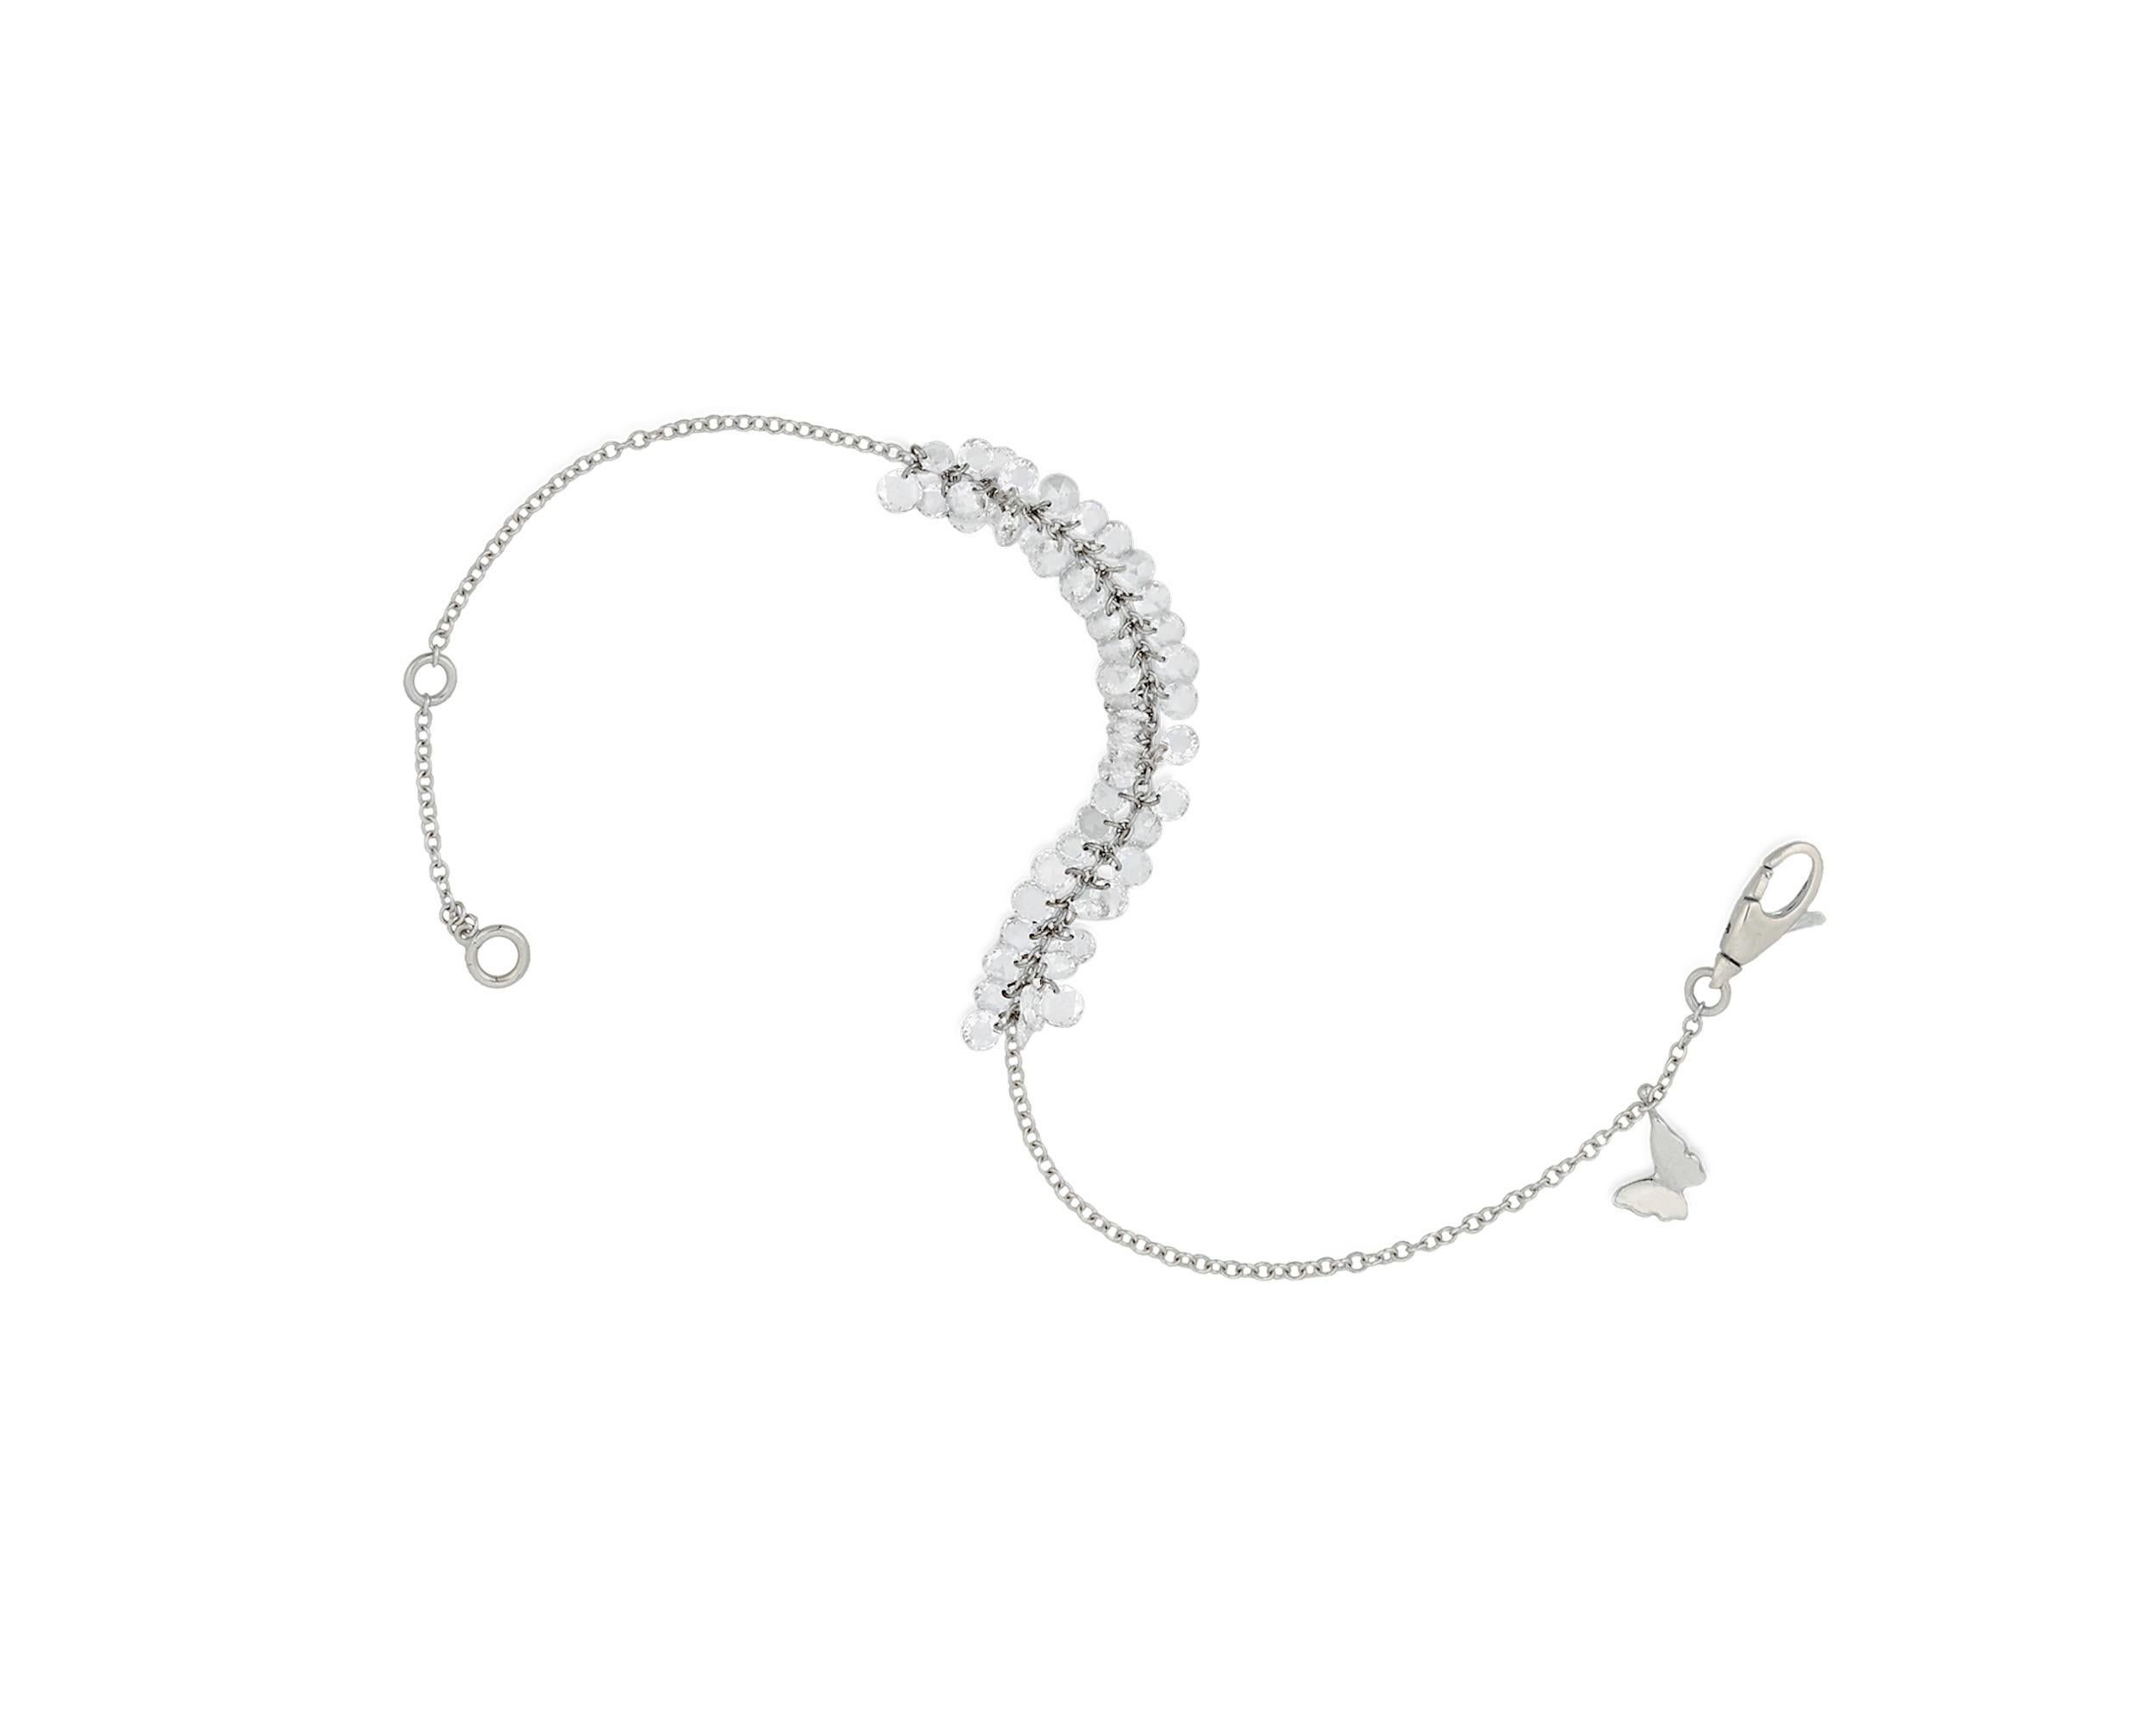 This delicate diamond bracelet showcases the romantic and elegant rose cut. The diamonds, totaling 2.07 carats, hang individually from their chain, ensuring the gemstones brilliantly catch the light with each movement. Set in 18K white gold.

7